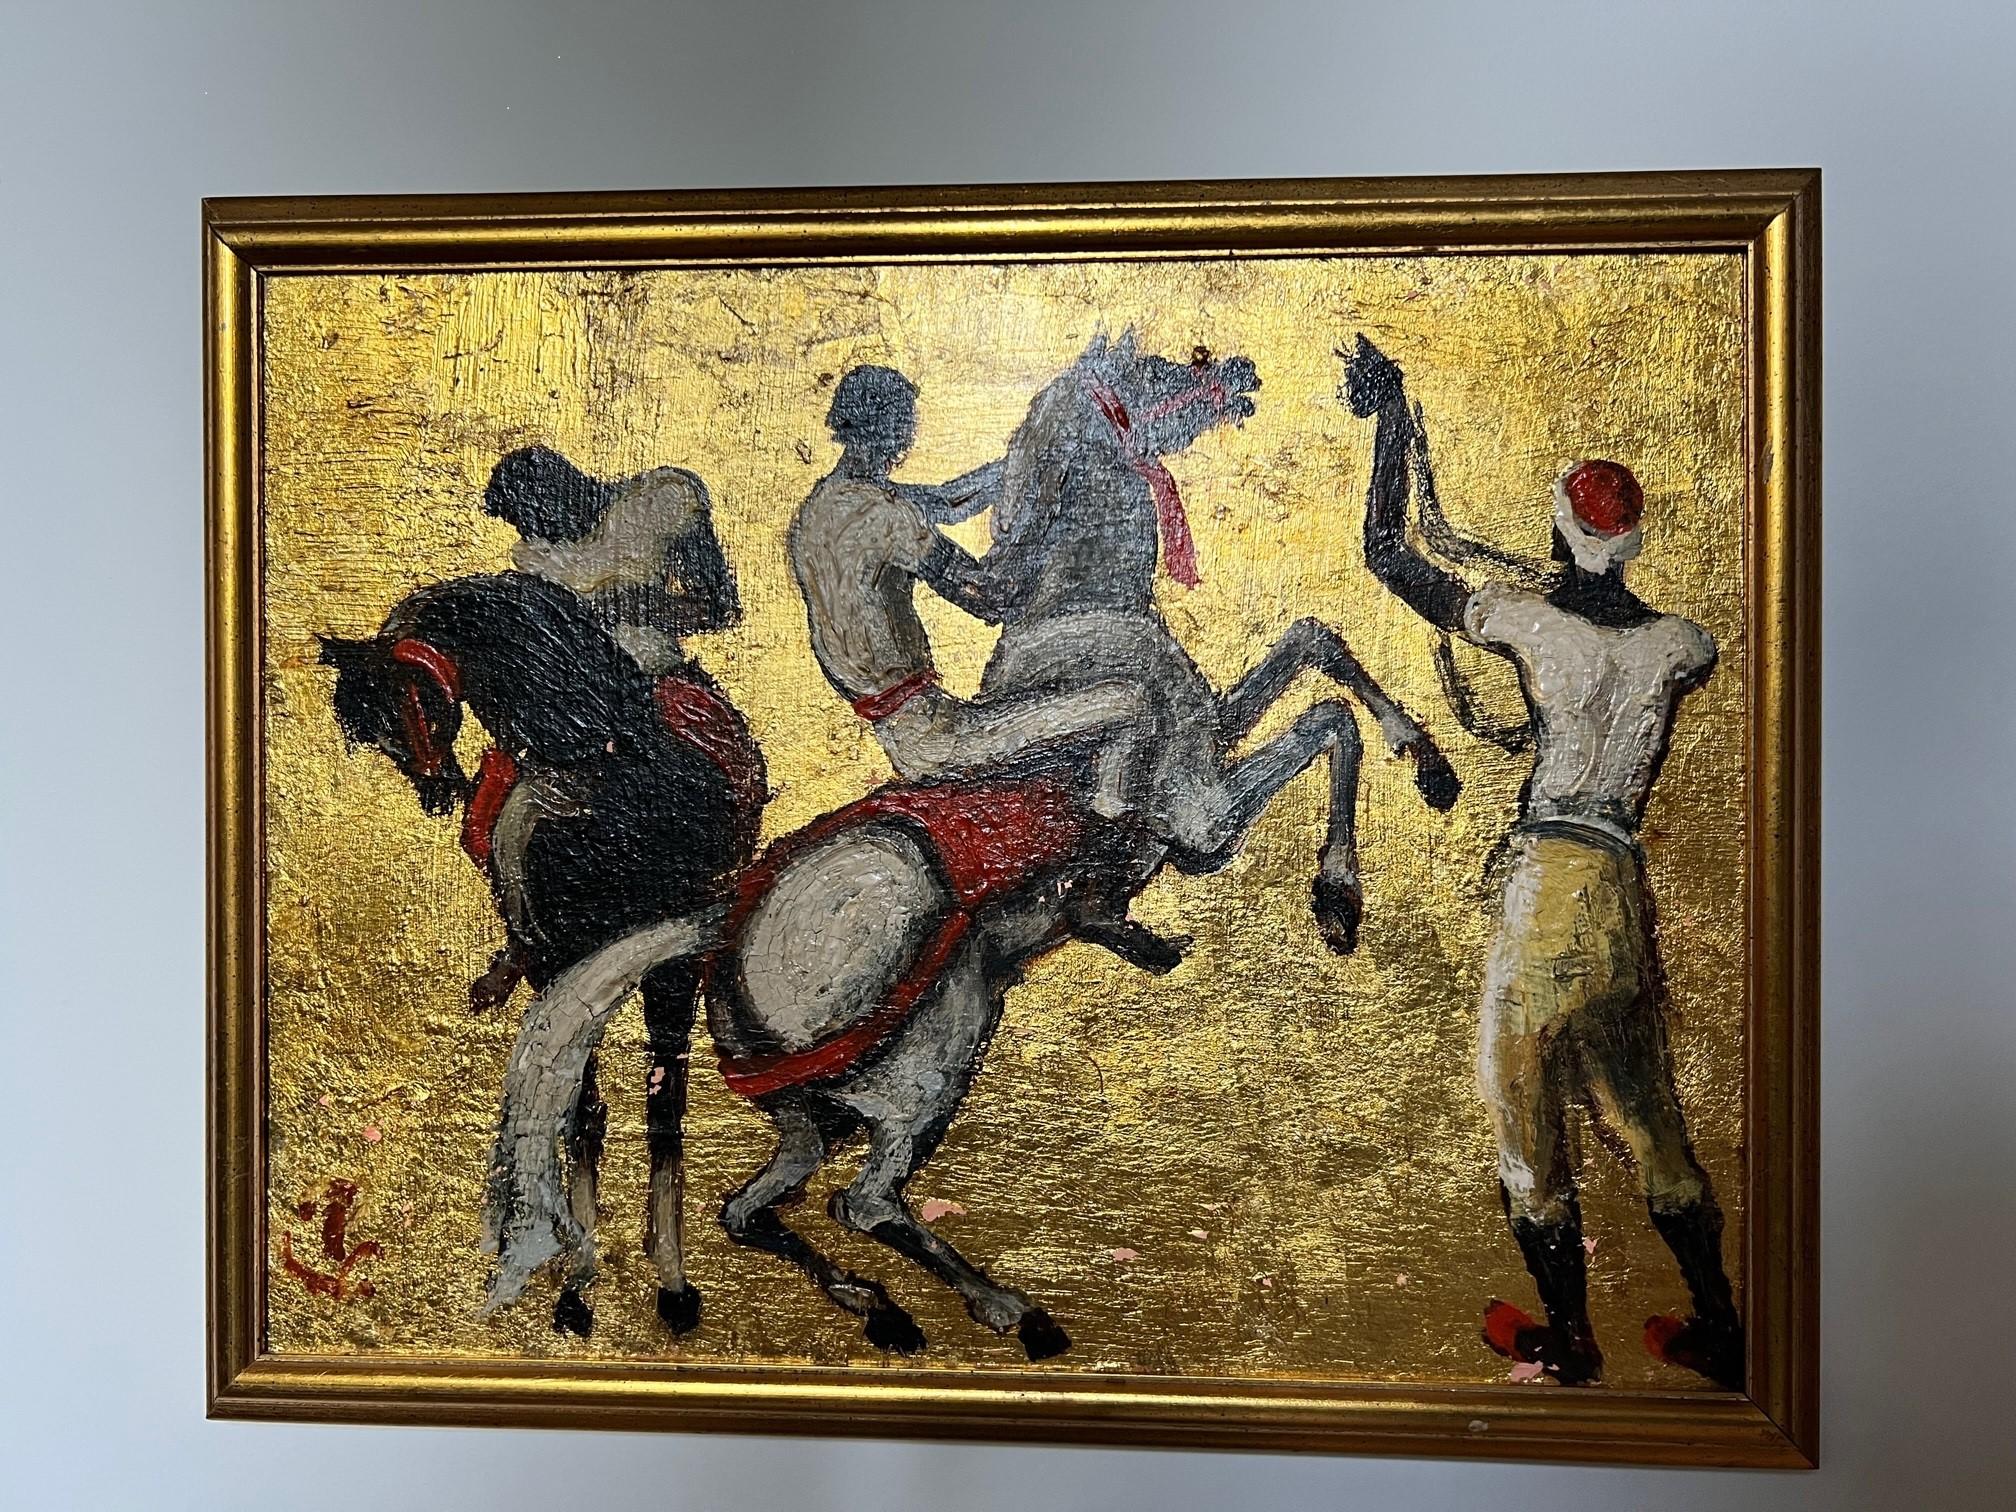 Gilt 1950s Art Deco Style Figurative Painting, Horses with Riders by Porter Woodruff